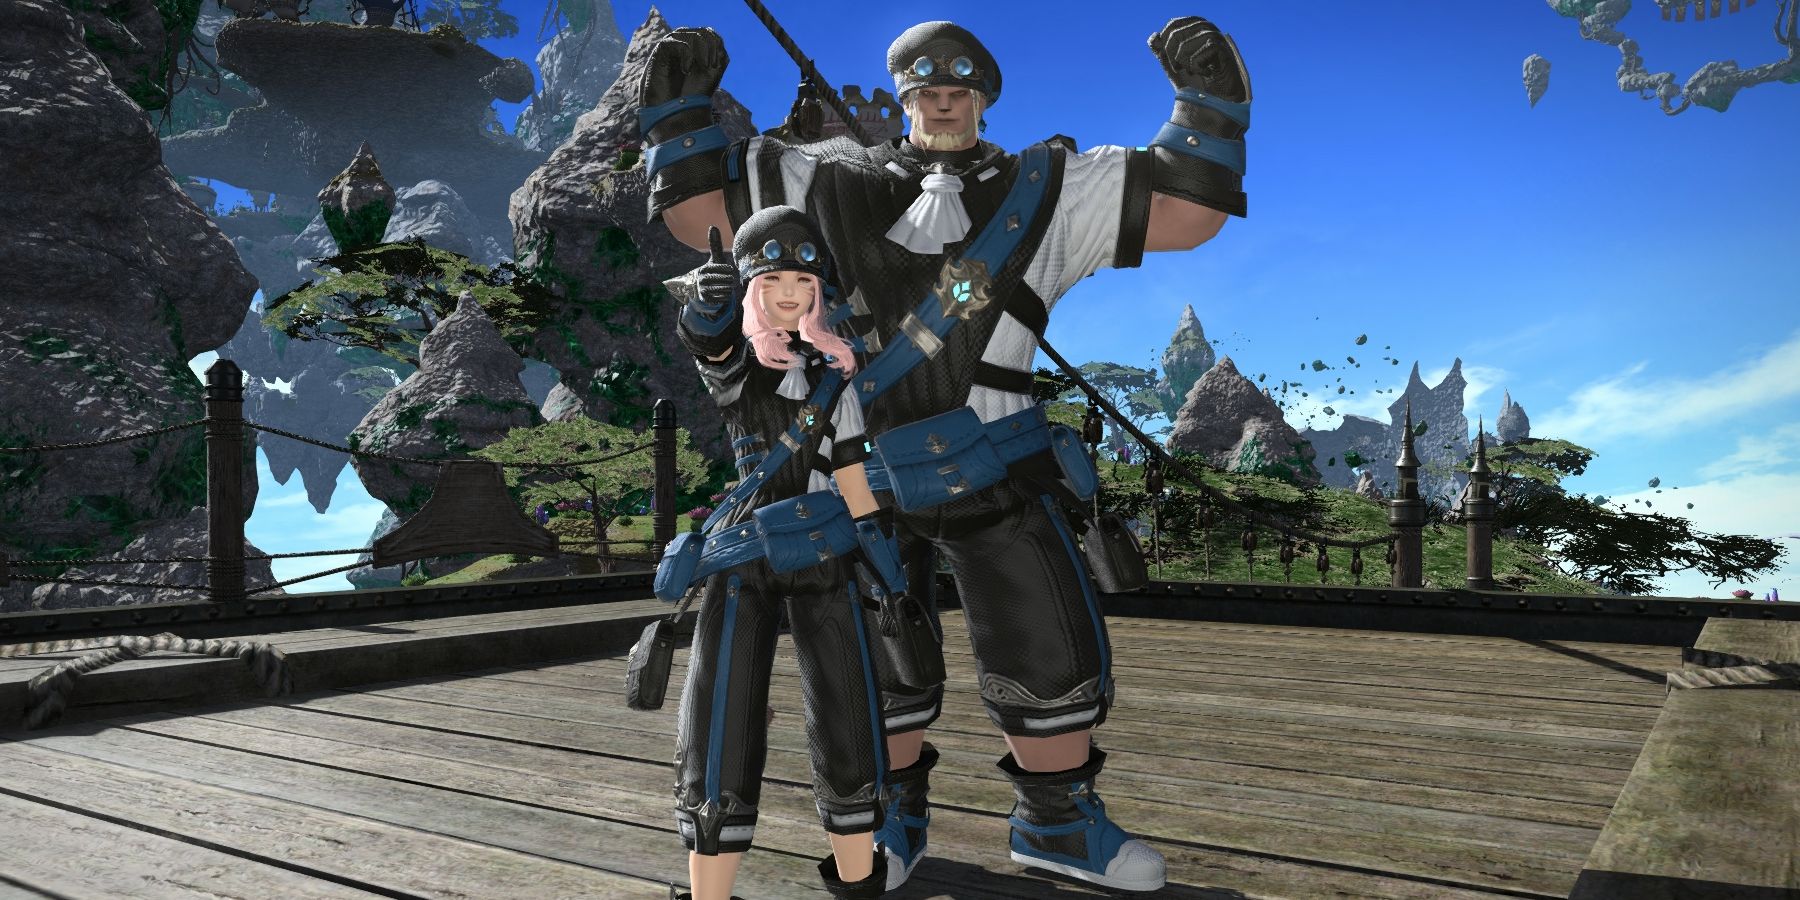 Final Fantasy XIV: How Crafting Collectables Works After New Patch 5.3